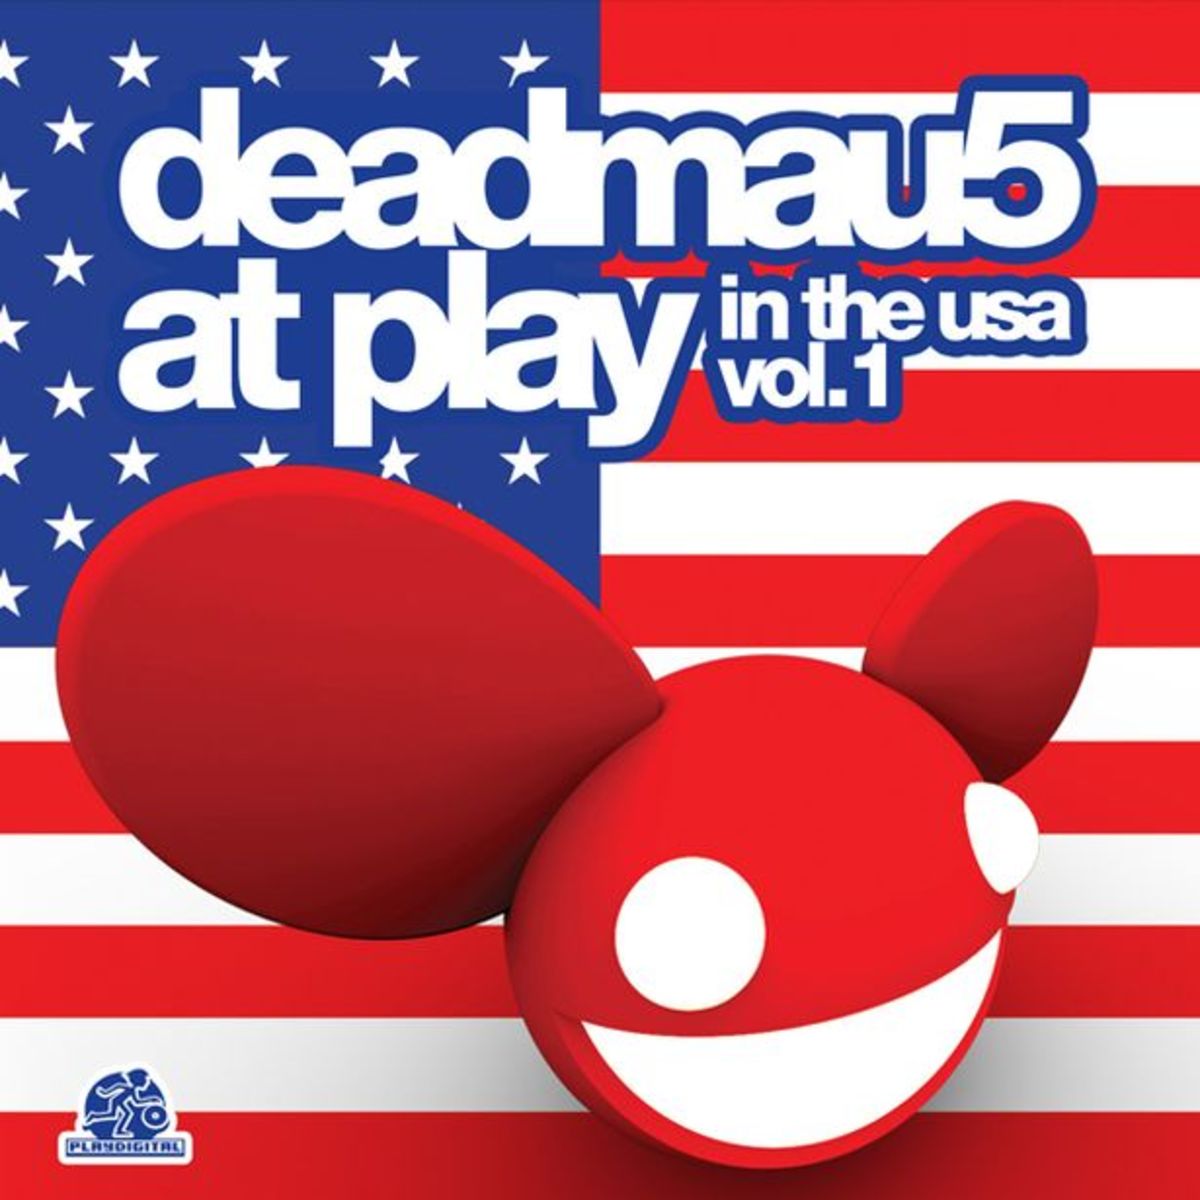 EDM News: deadmau5 Releases At Play In The USA, Vol. 1In Digital Format As A Beatport Exclusive